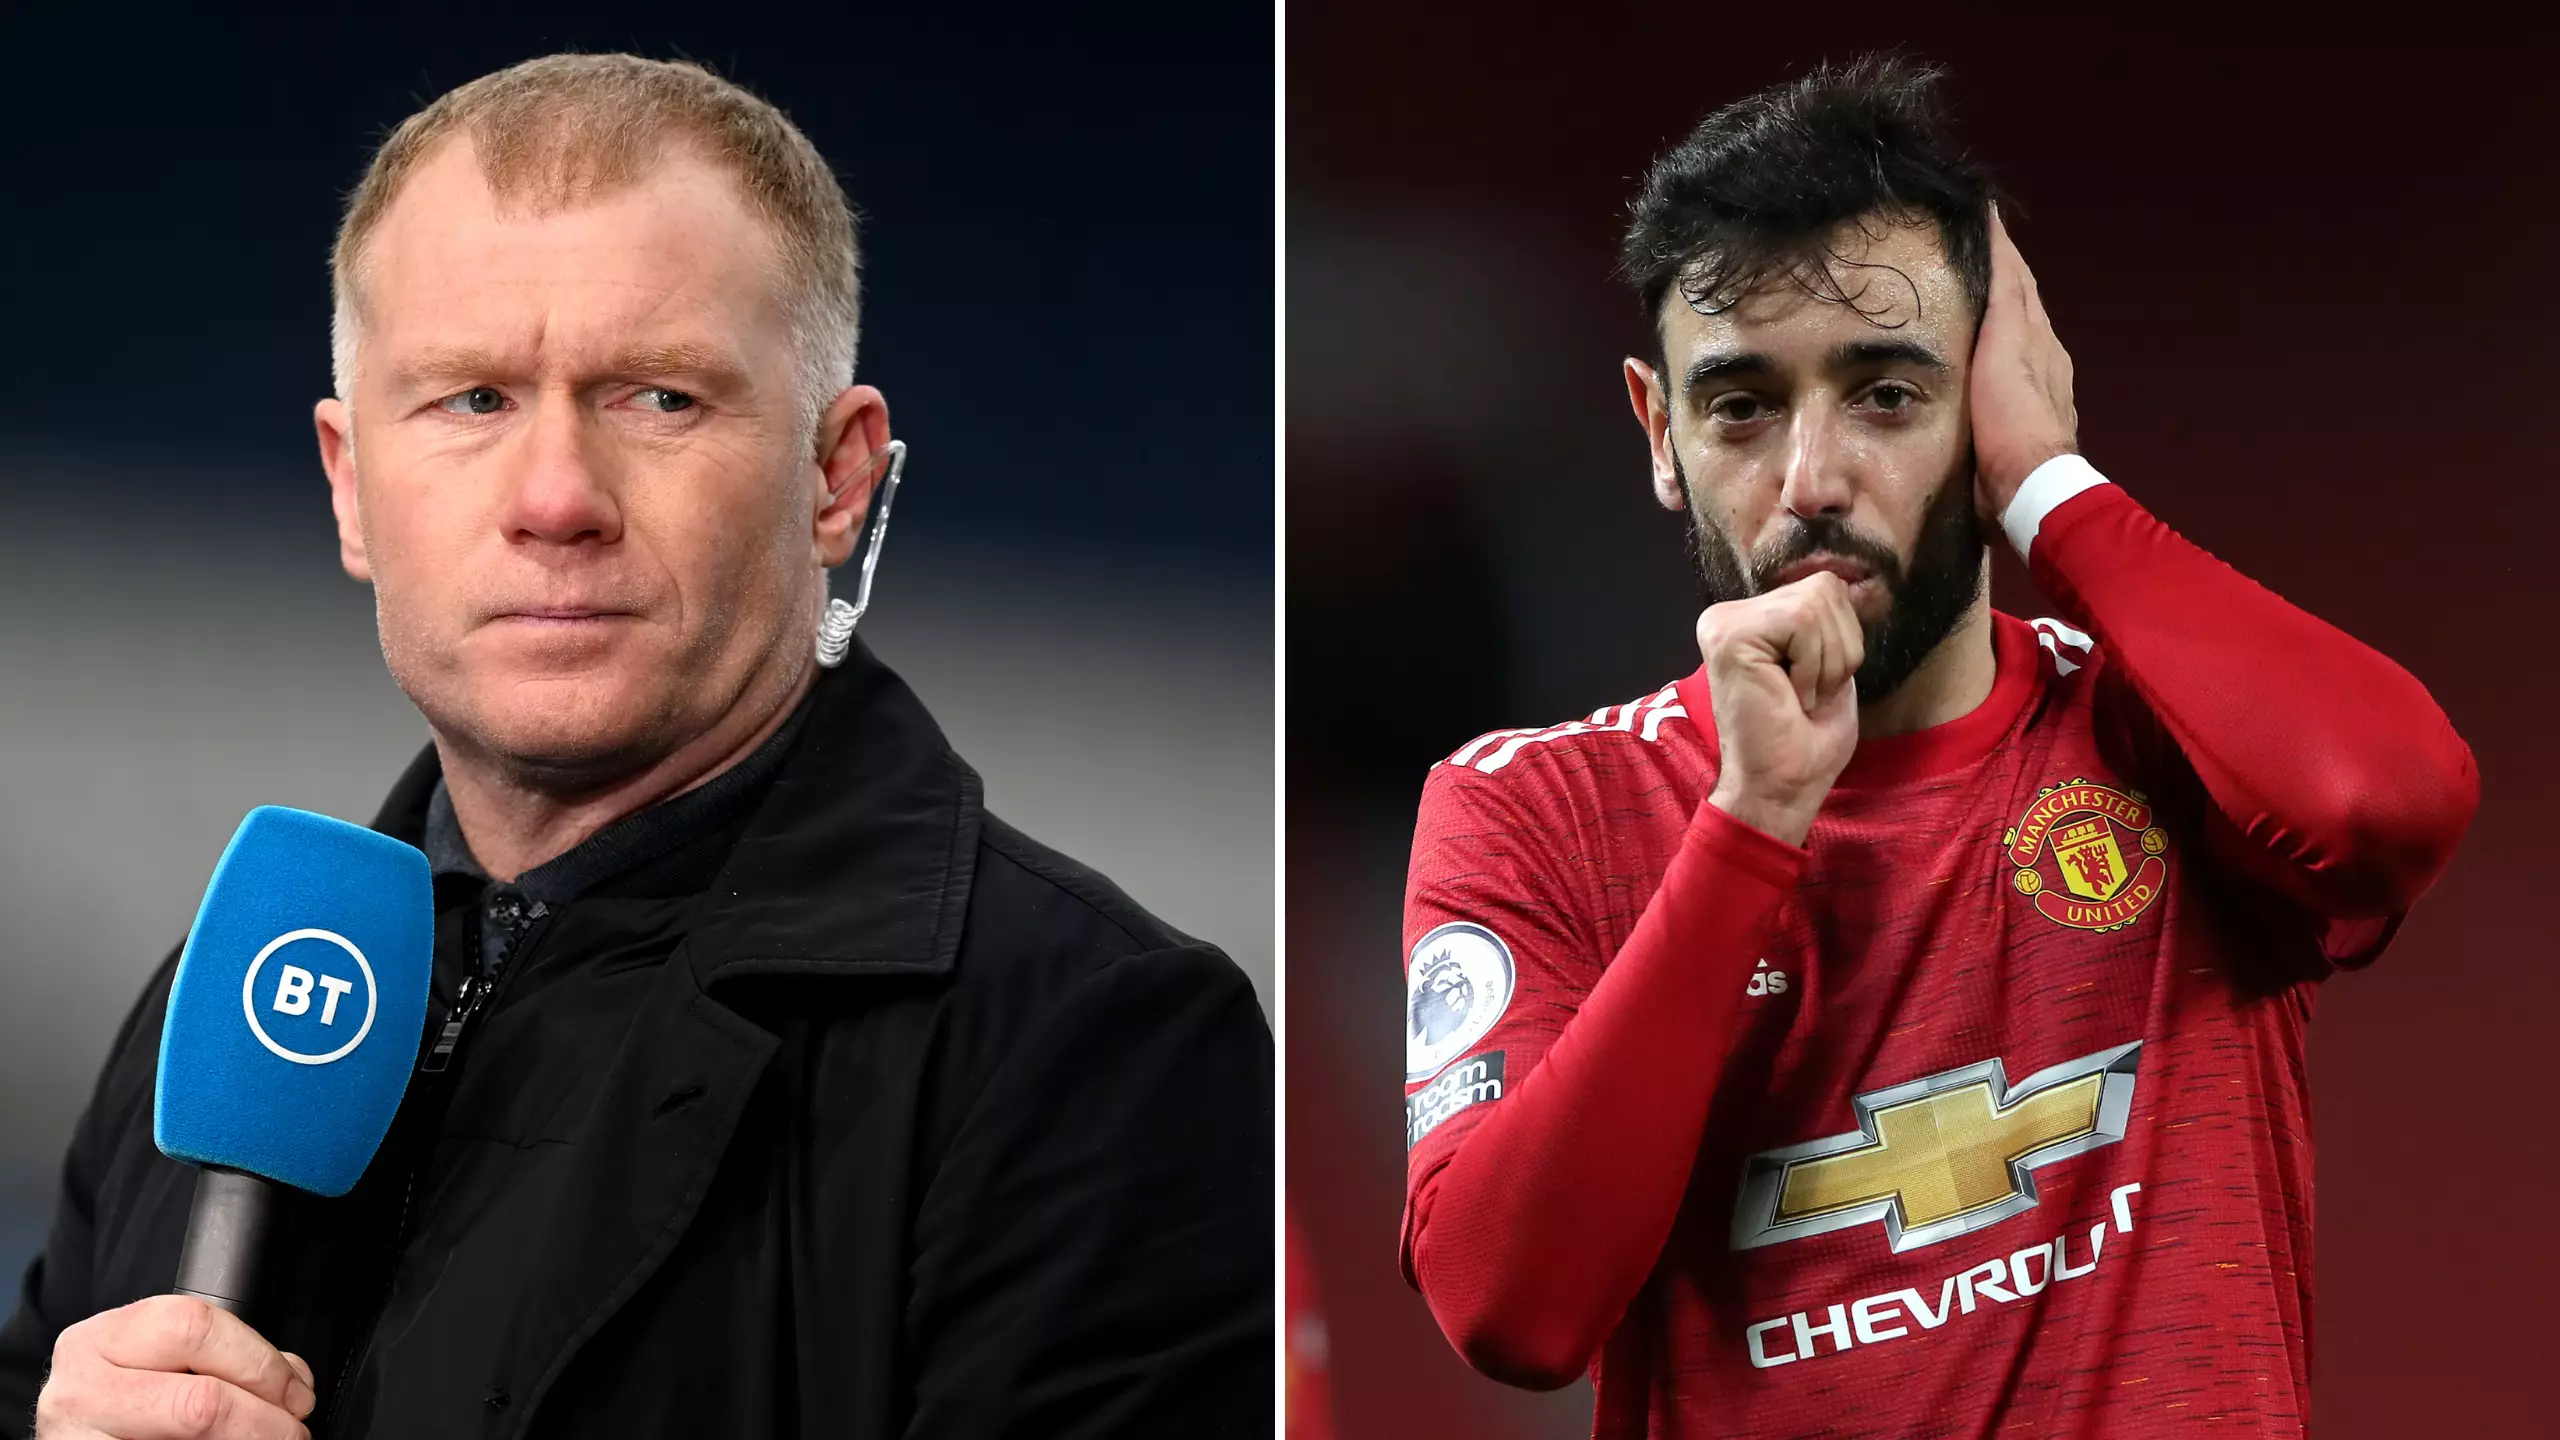 Paul Scholes Explains Why Bruno Fernandes Is A Better Player Than He Ever Was